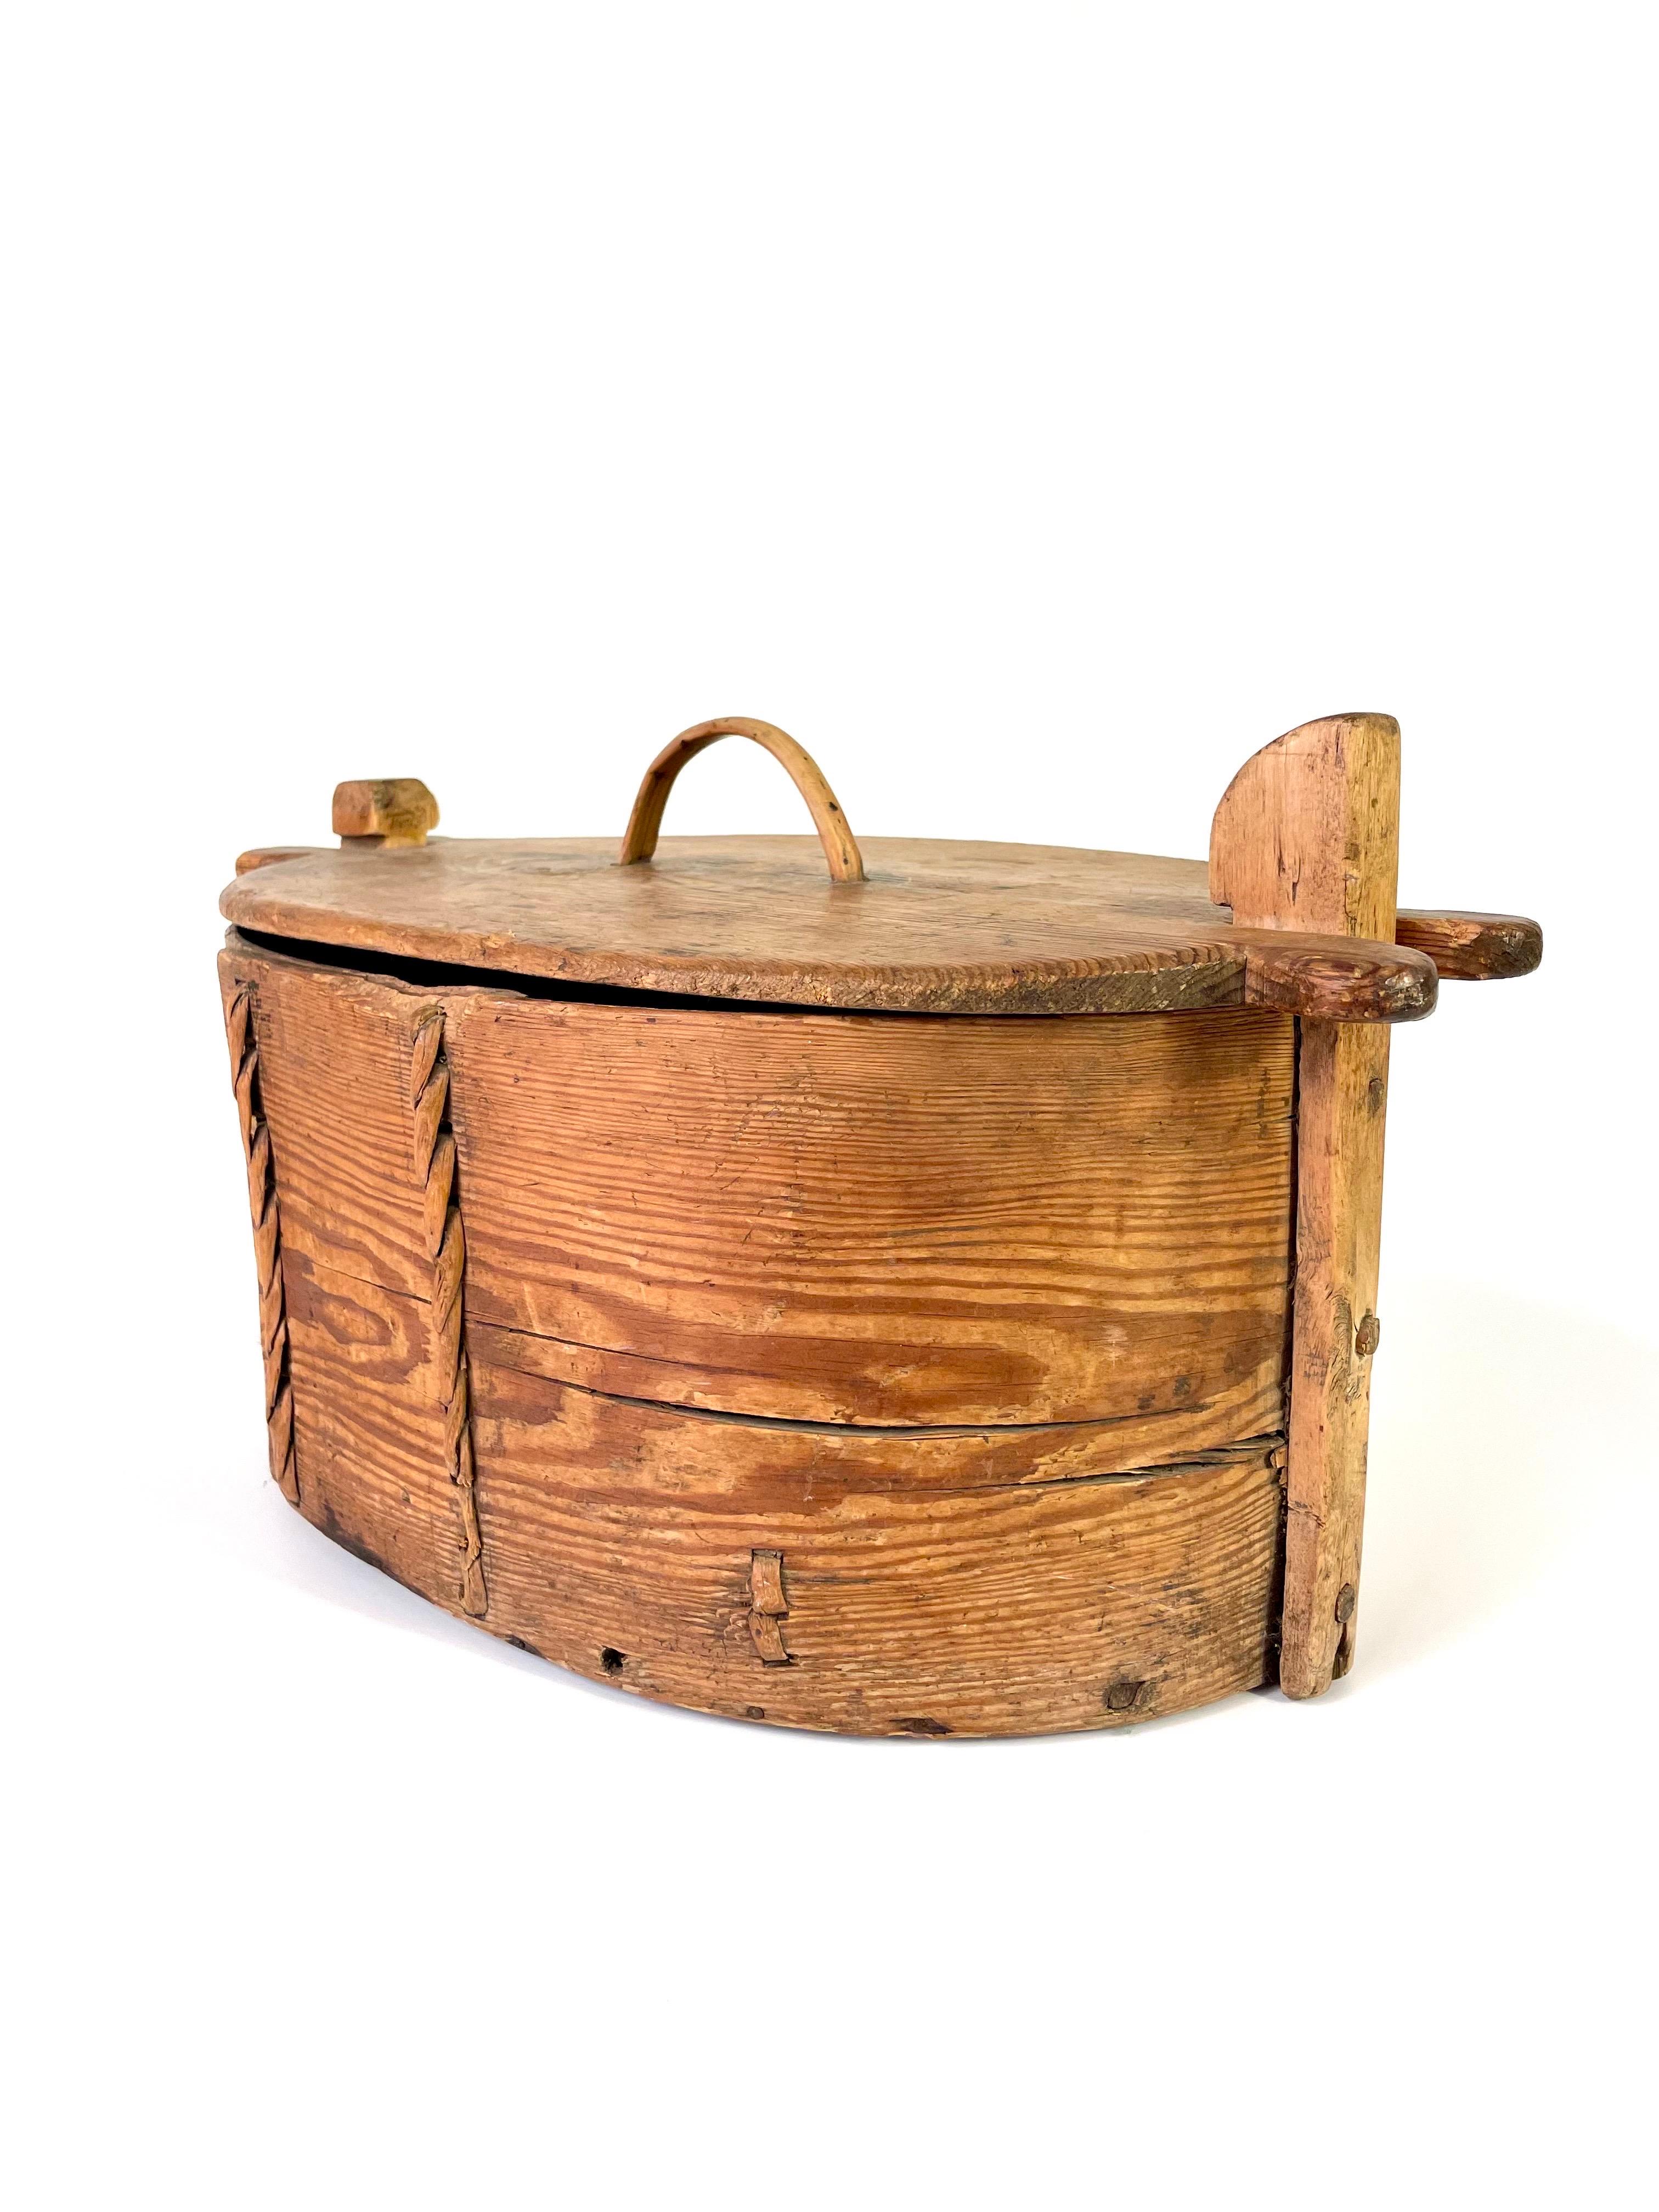 This is a Swedish wooden box, so-called svepask, from the second half of the 19th century.
This type of vessel was used when the daily provisions were carried out to the fields or to the forest.
The lid was used as a cutting board.

It comes made of